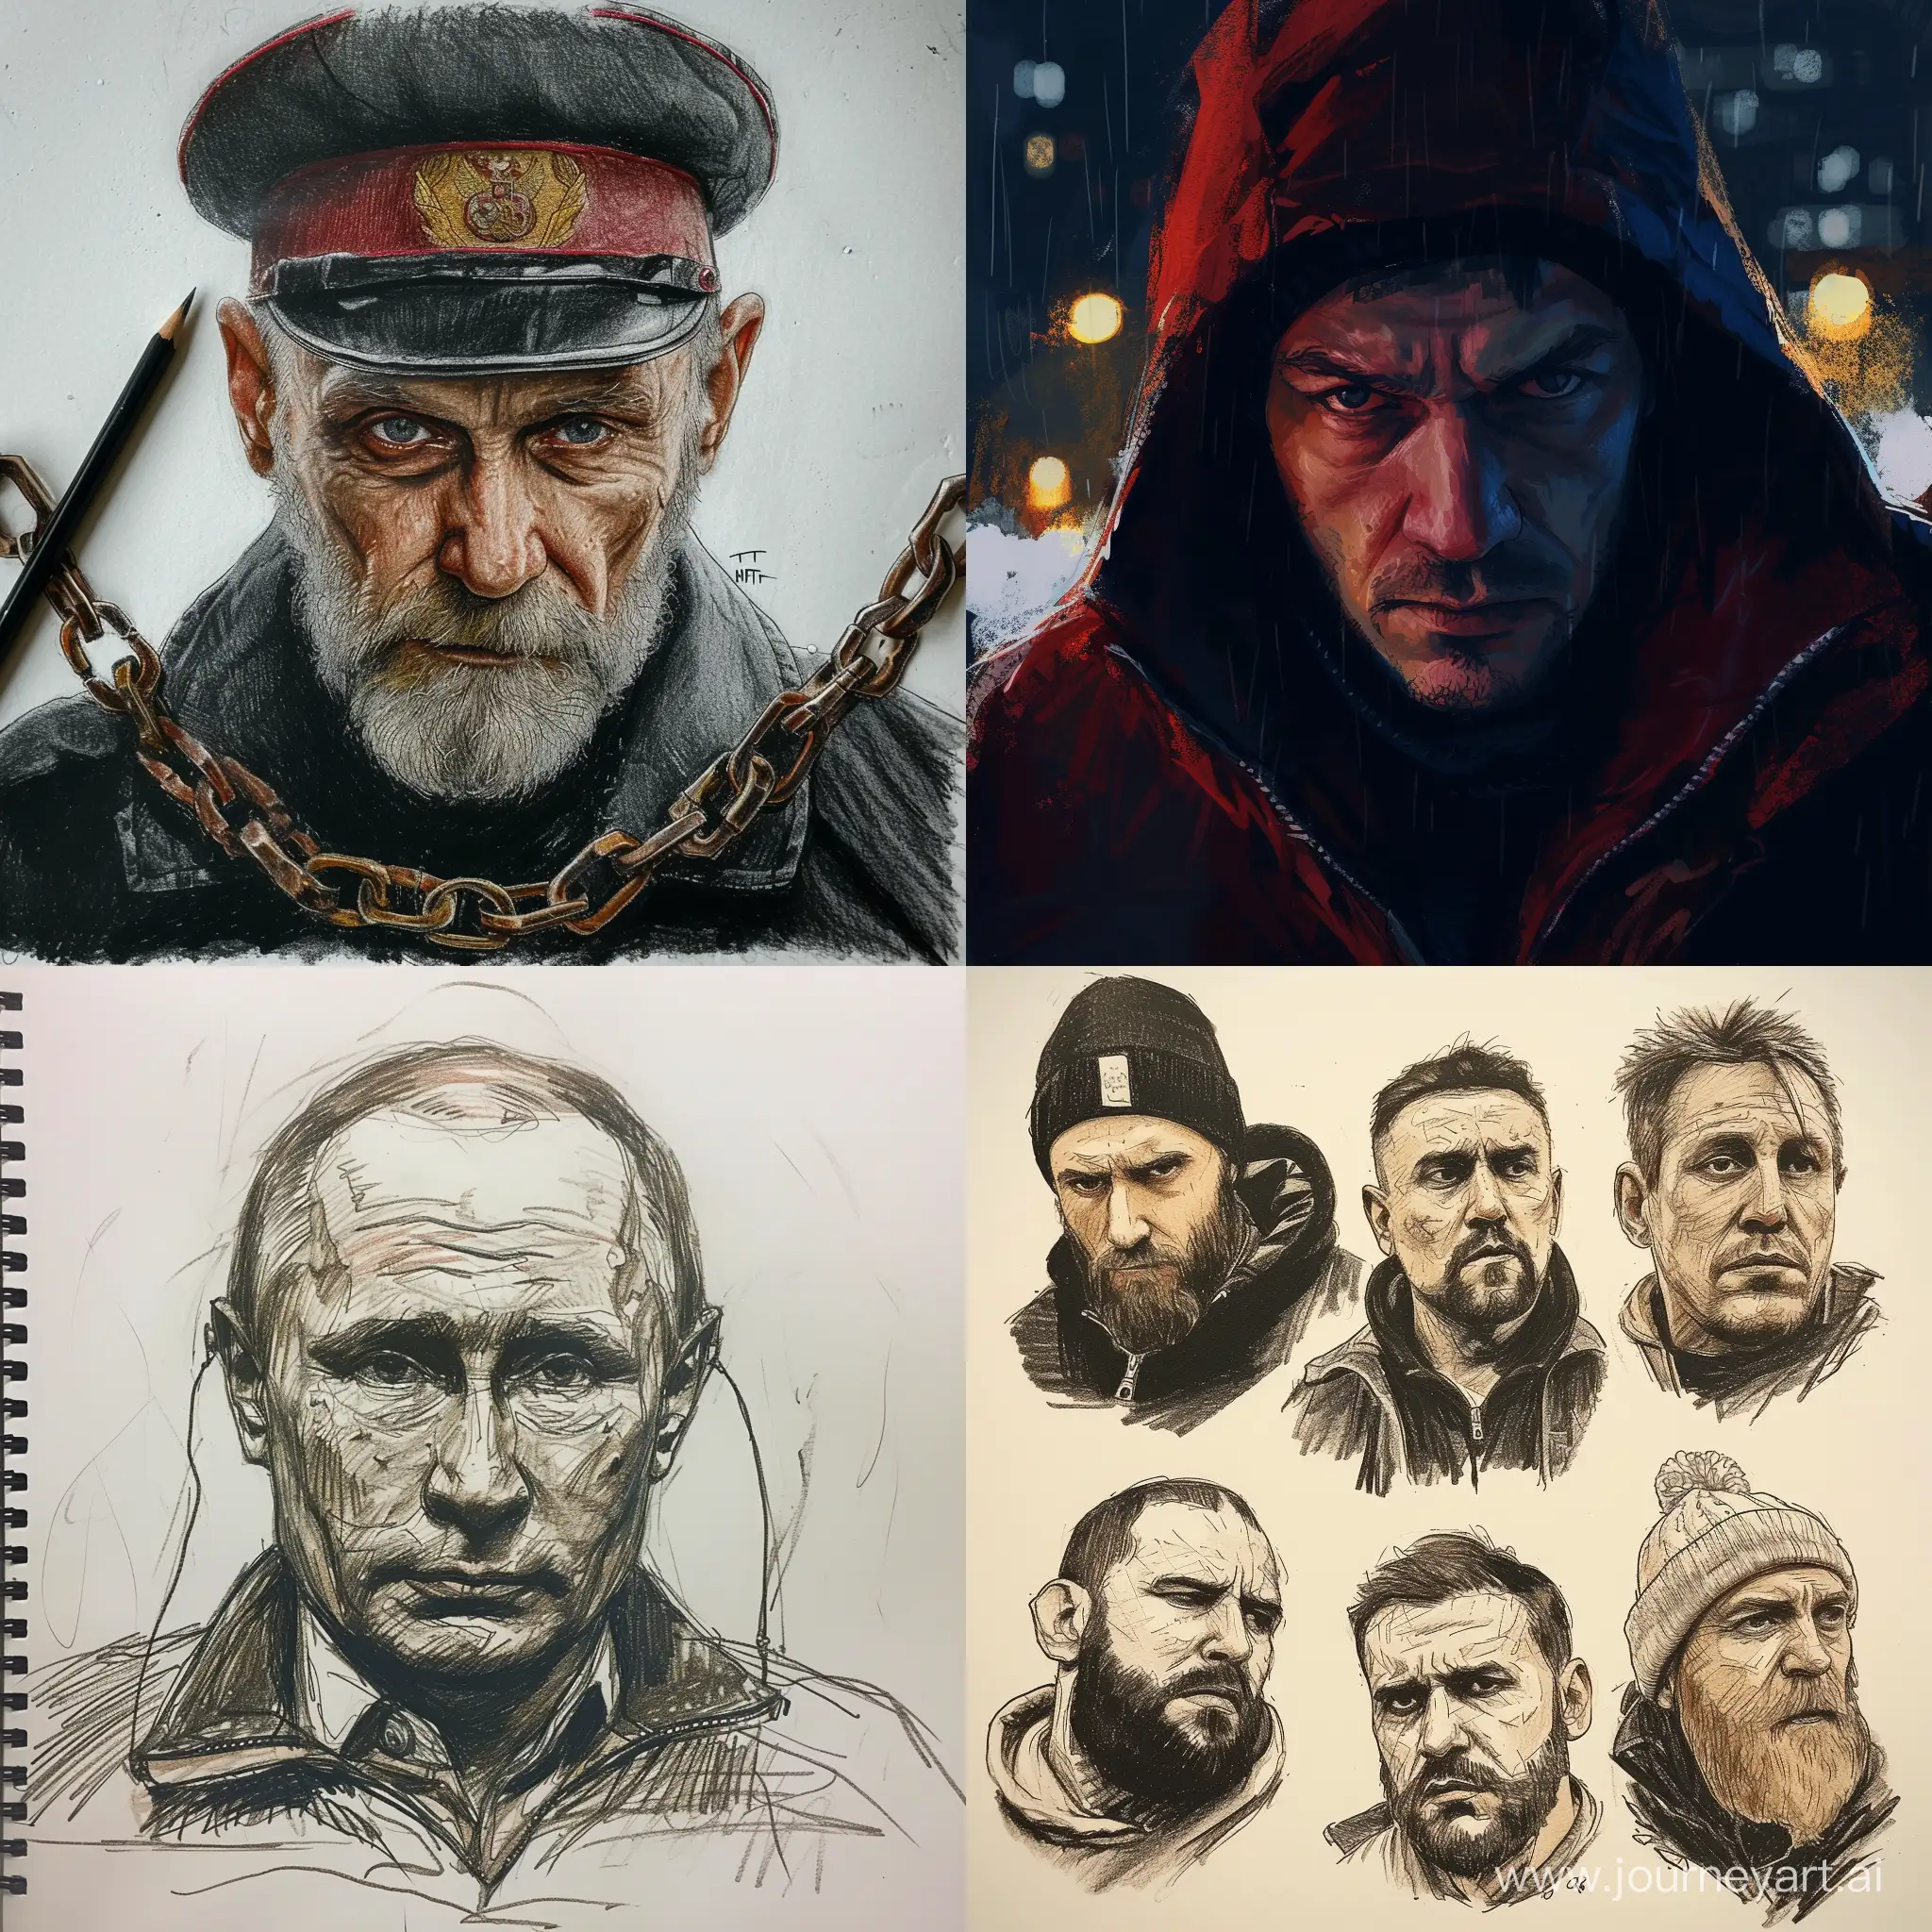 NFT-Criminals-in-Russia-Digital-Artwork-Featuring-Intriguing-Virtual-Criminal-Characters